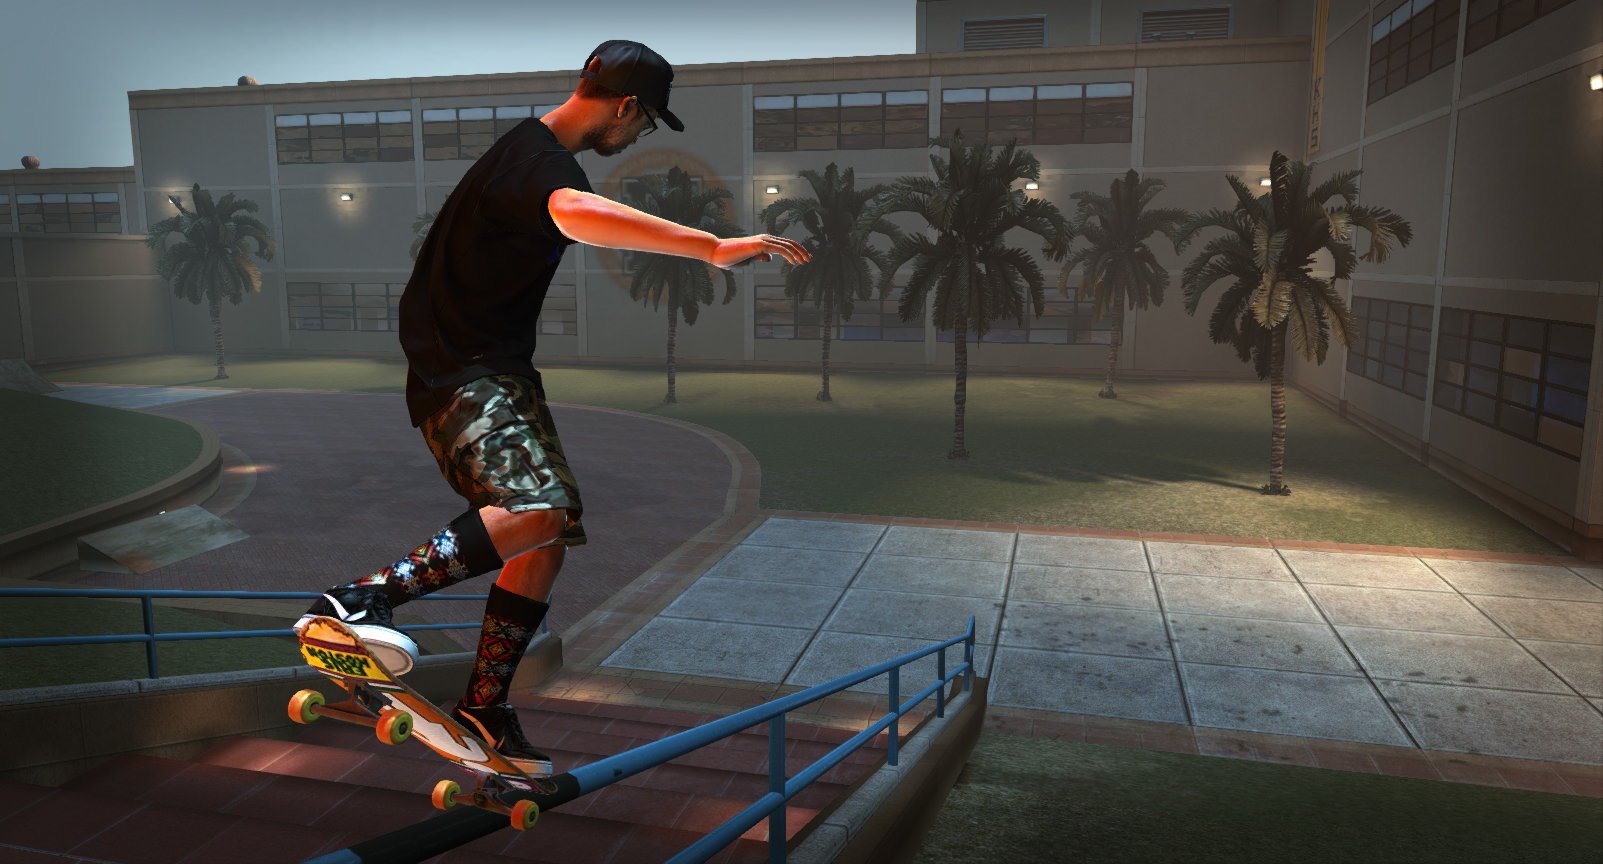 Activision Confirms New “Tony Hawk” Game in the Works - We're Just Hoping It Doesn't Involve Peripherals